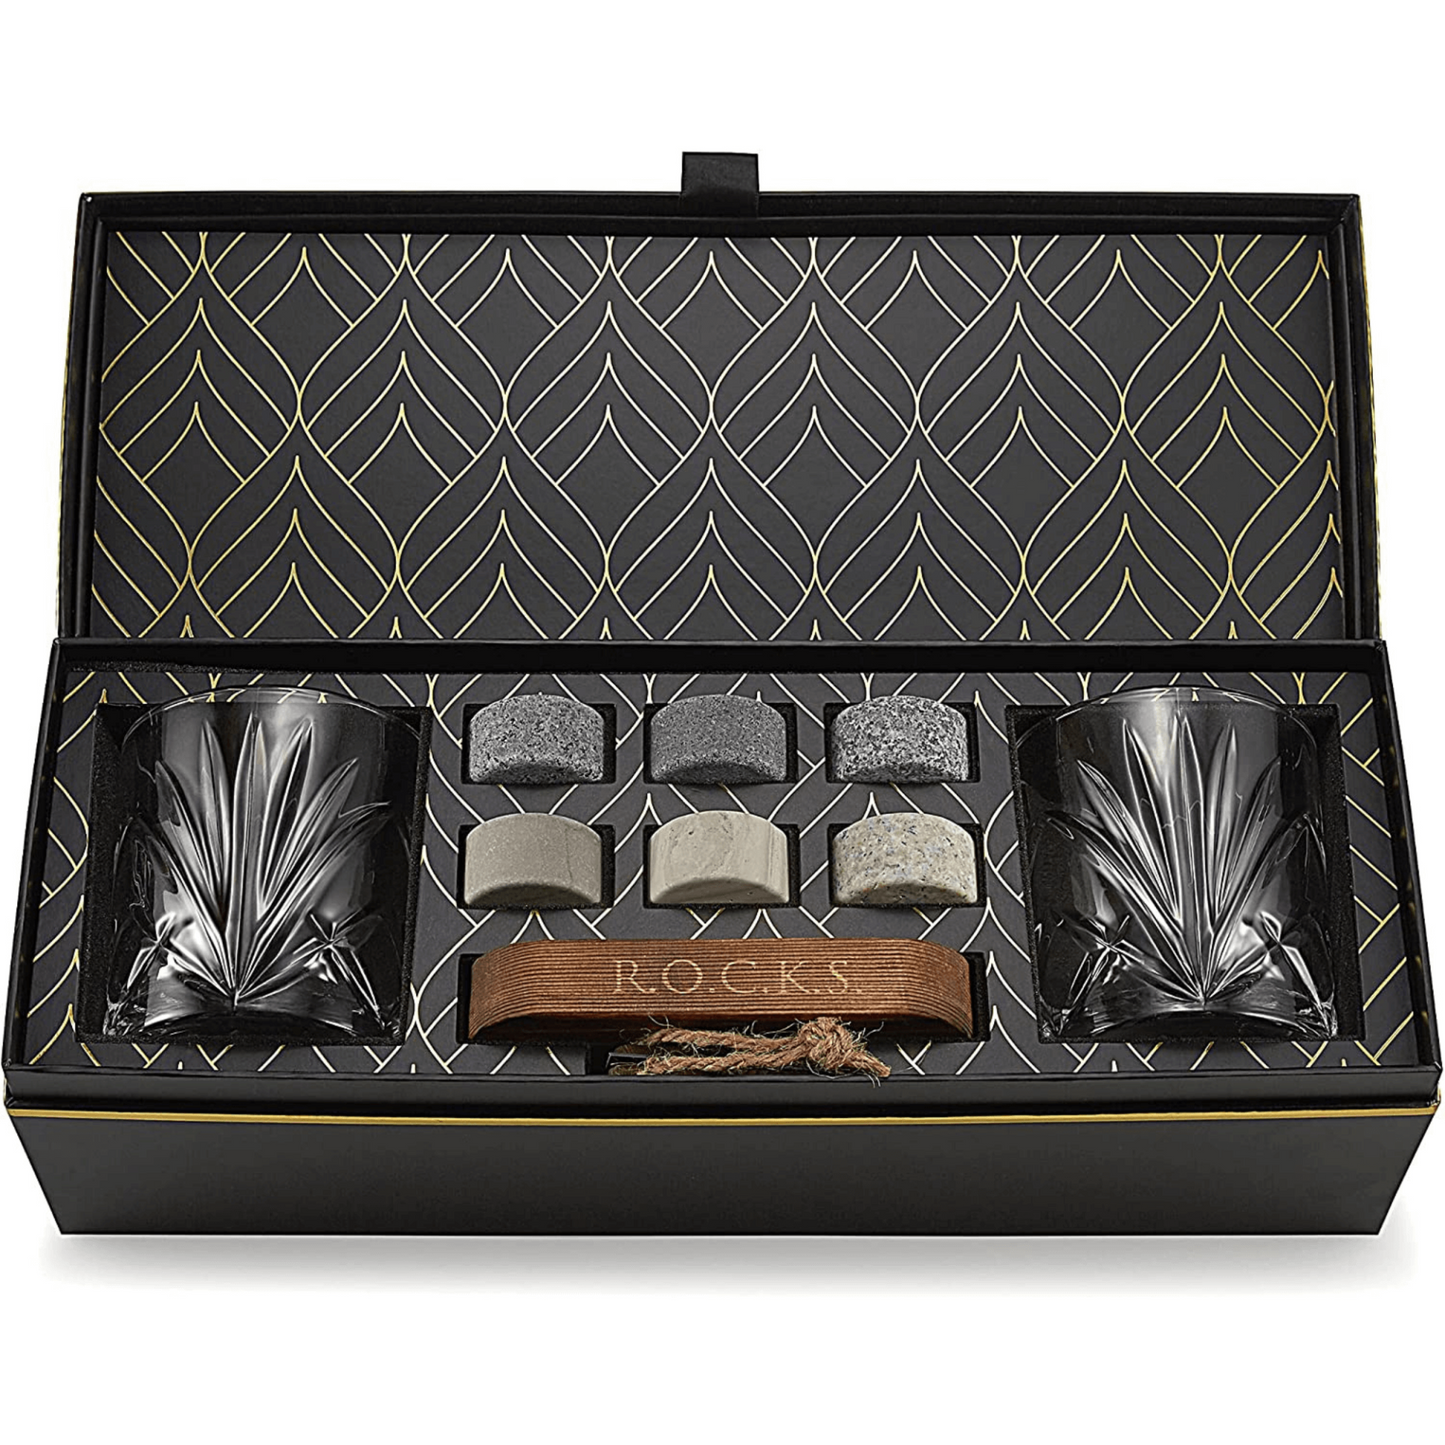 R.O.C.K.S Whiskey Chilling Stones Gift Set With 2 Palm Crystal Glasses